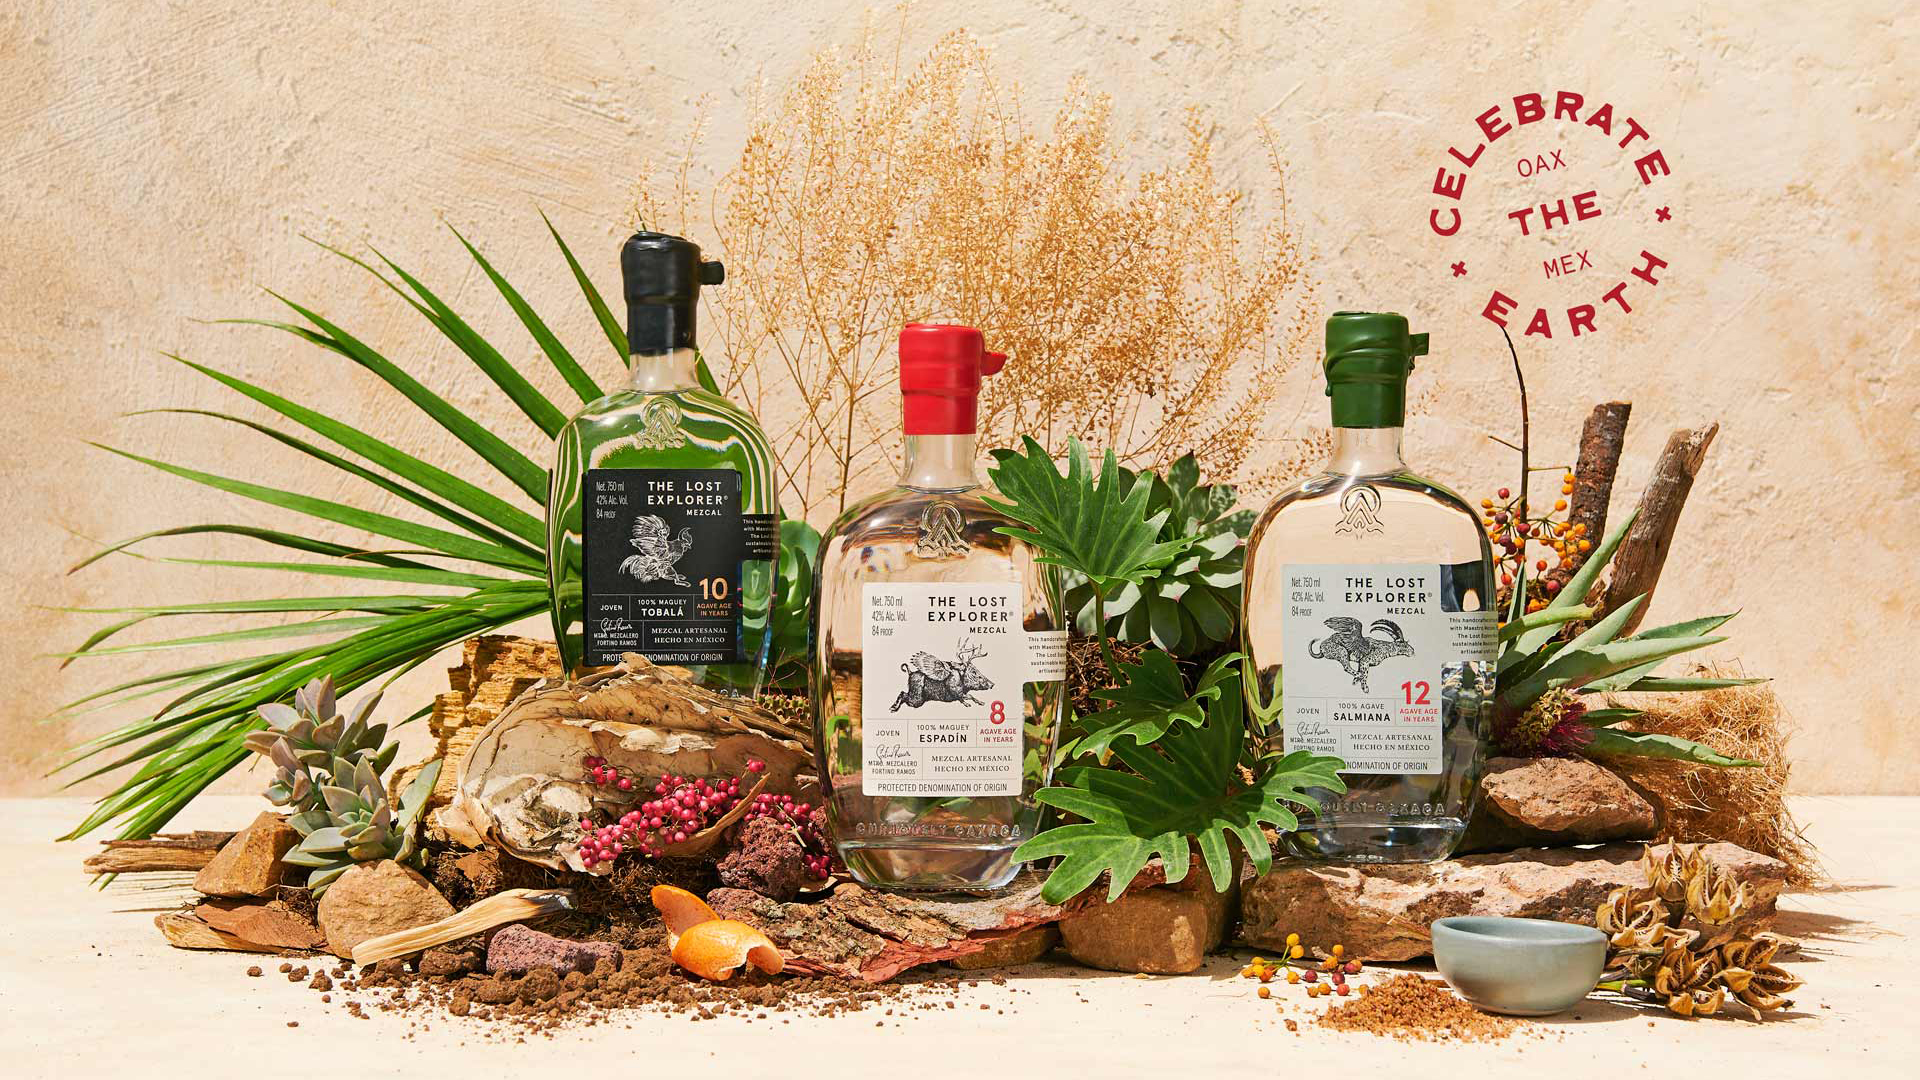 The Lost Explorer Mezcal Announced Celebrate The Earth Campaign, Partners With Voice For Nature Foundation